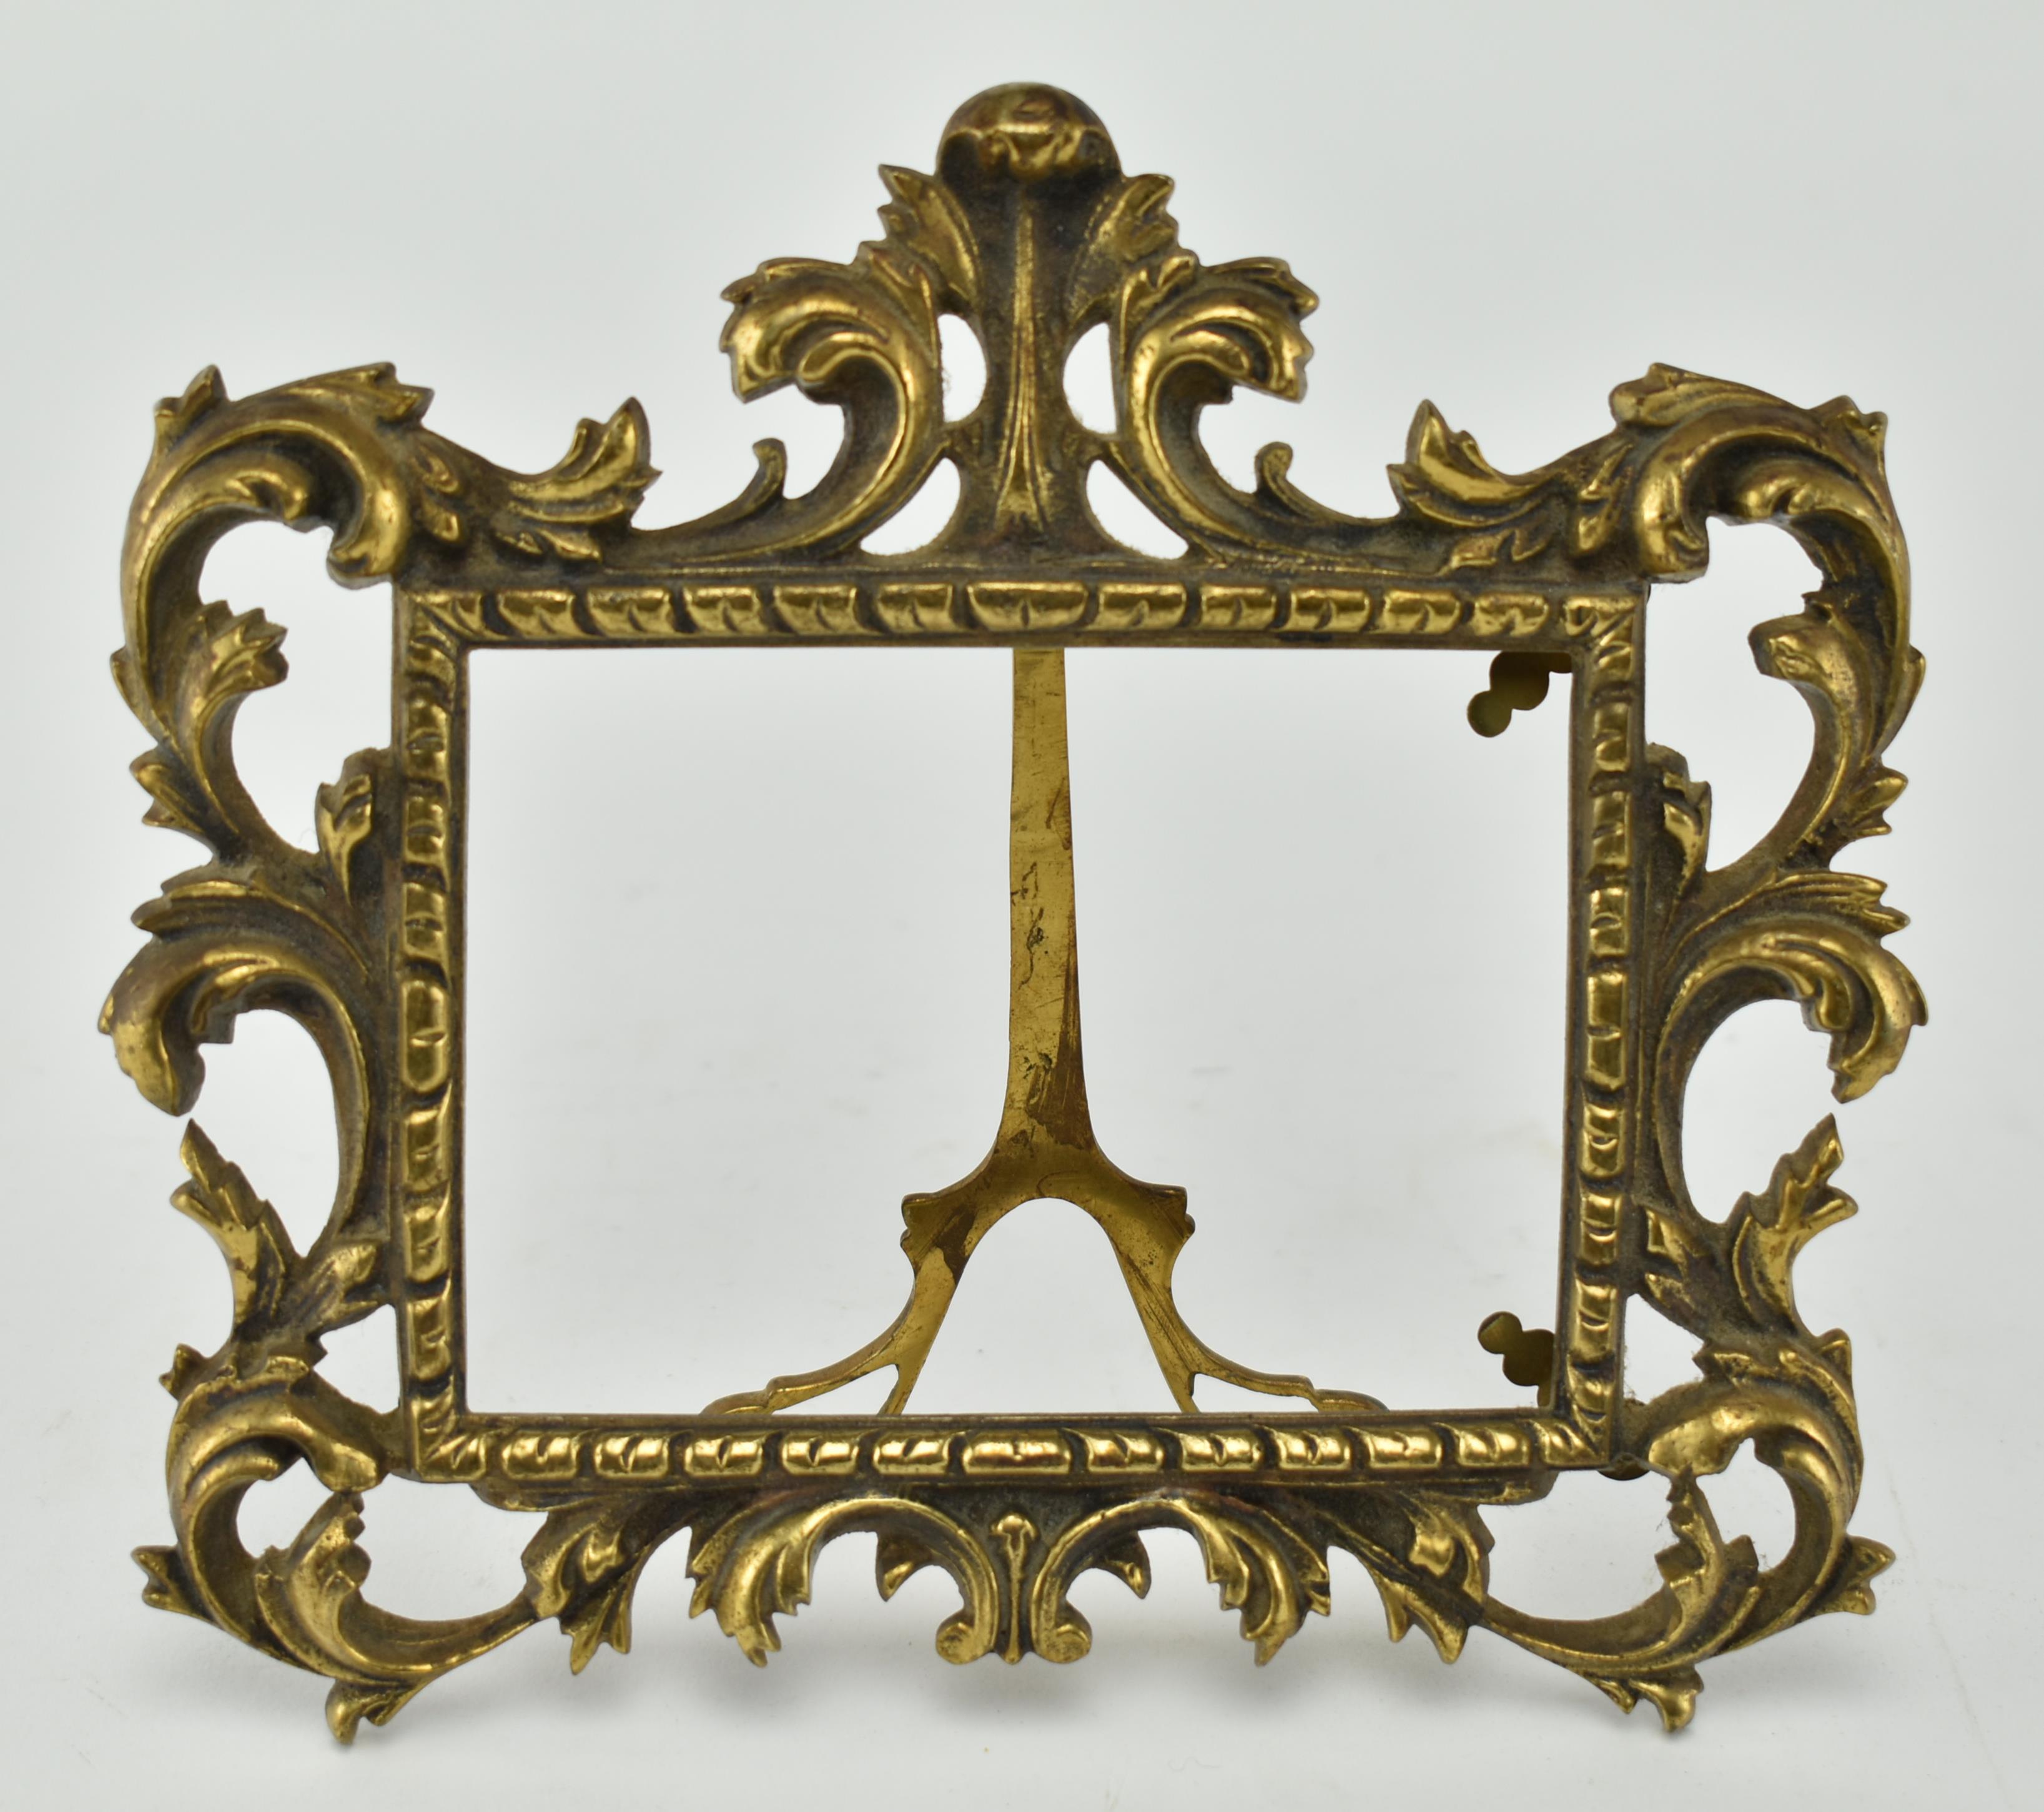 EARLY 20TH CENTURY CONTINENTAL BRASS PHOTOGRAPH FRAME - Image 2 of 5